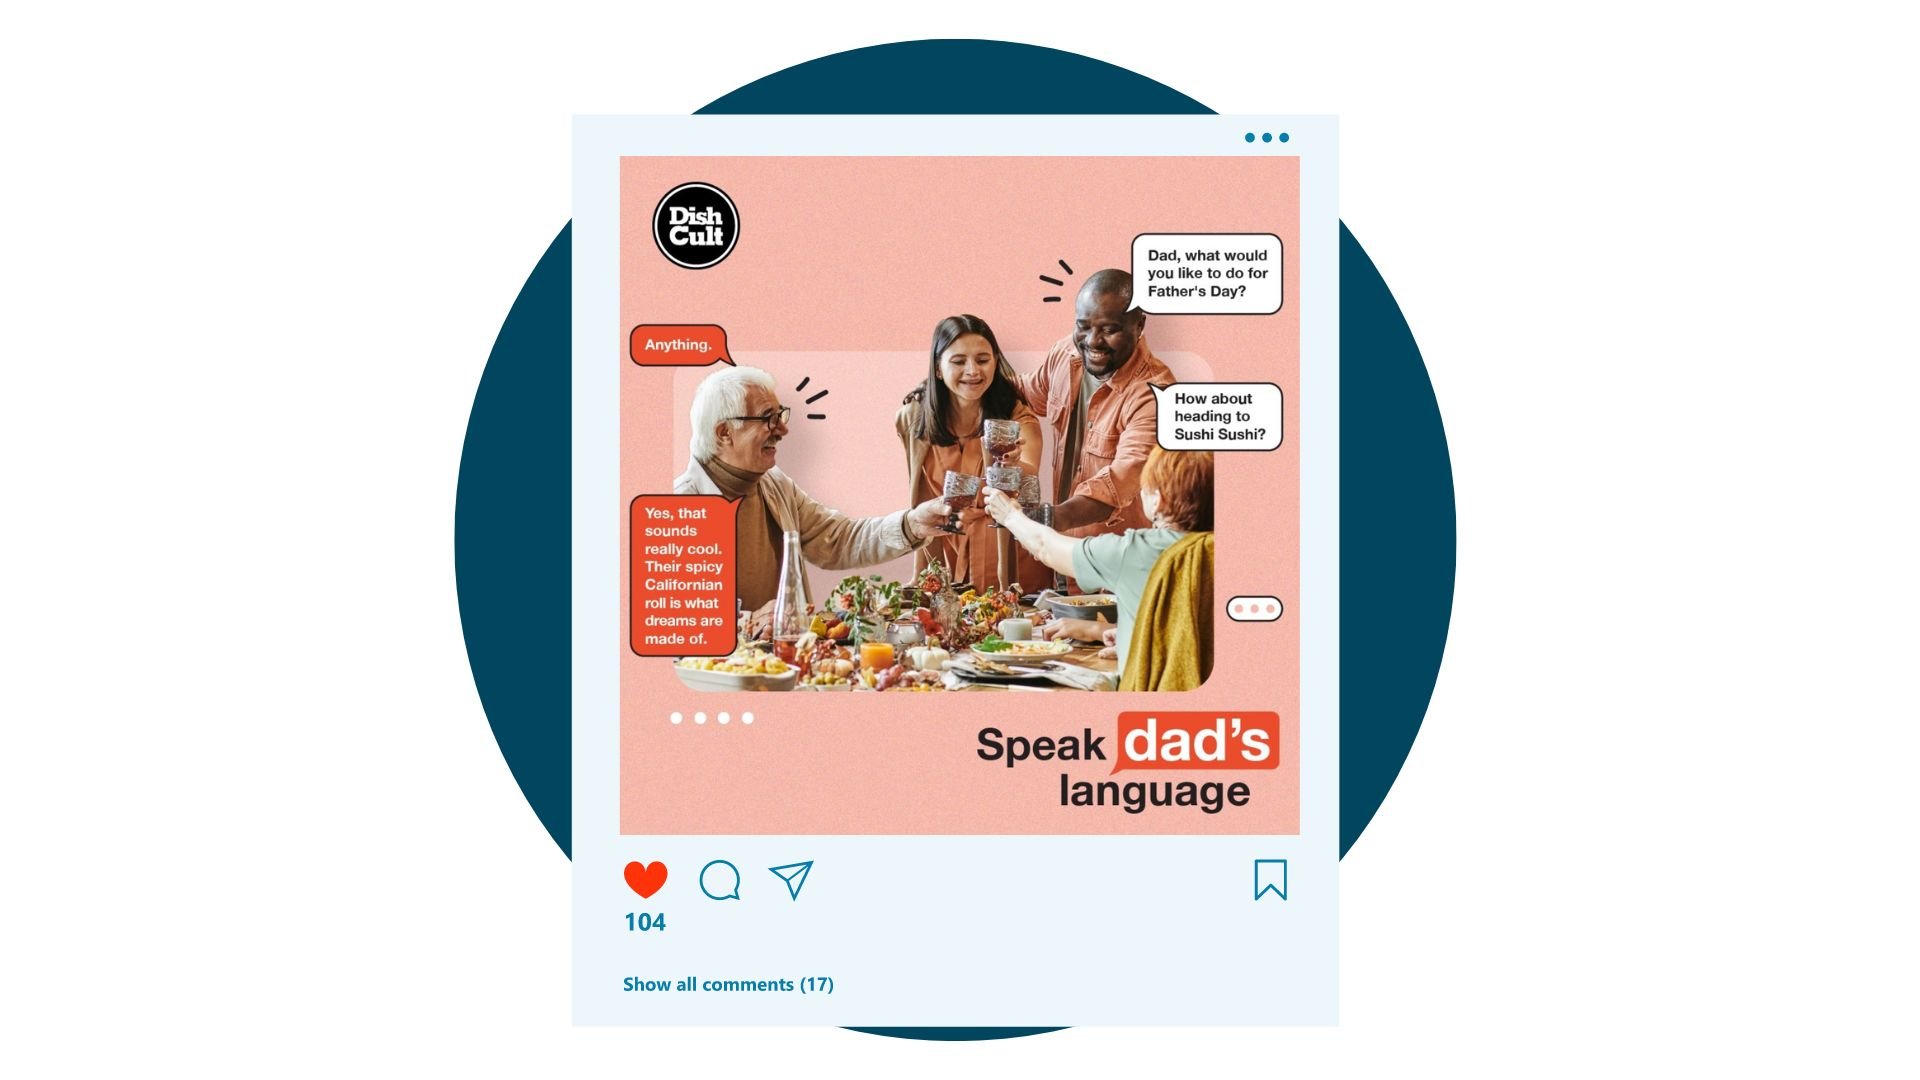 Example of a Father's Day promotion on social media from Dish Cult